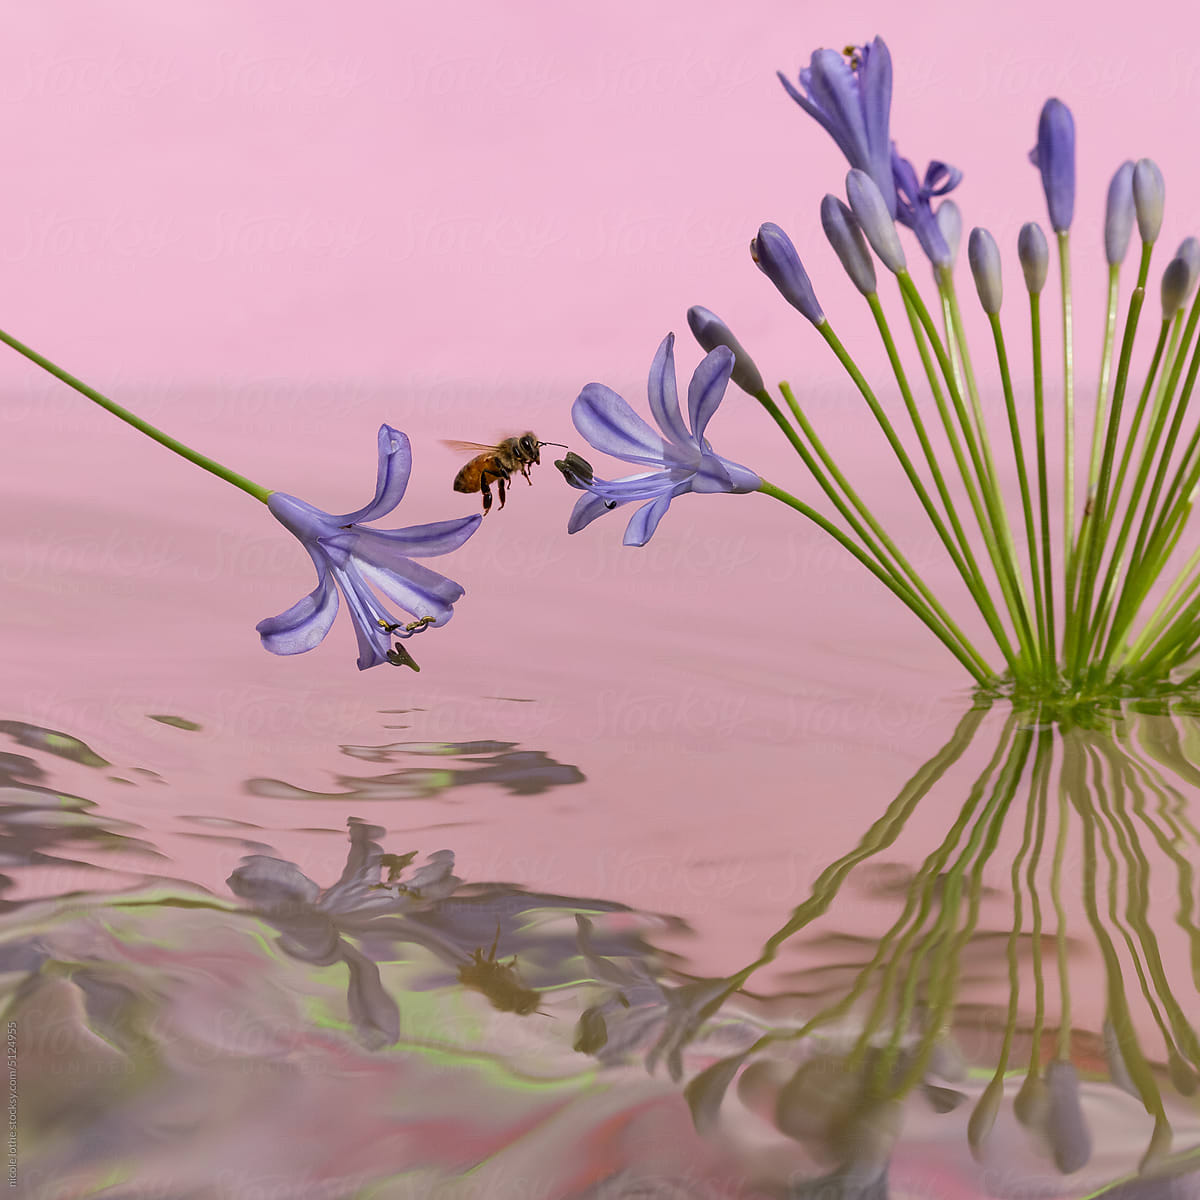 Bee flying between flowers, psychedelic reflections.